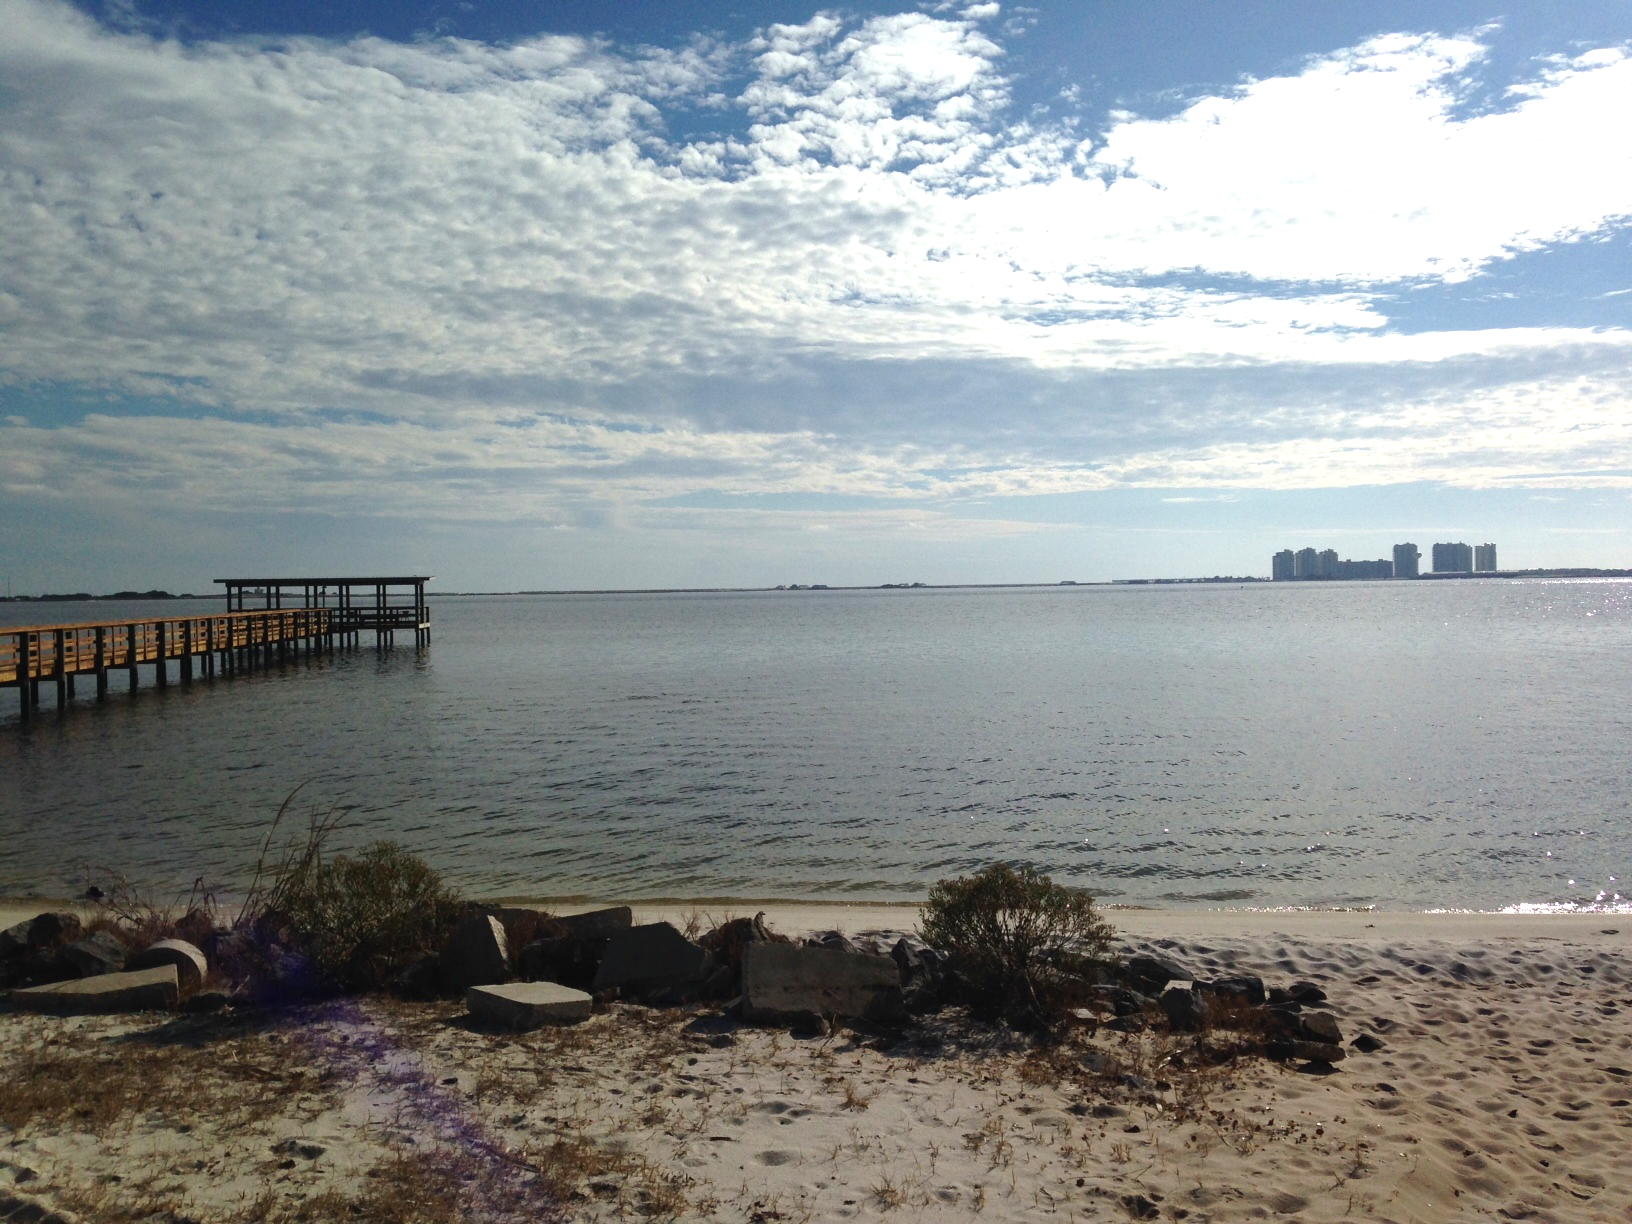 A view of the Santa Rosa Sound